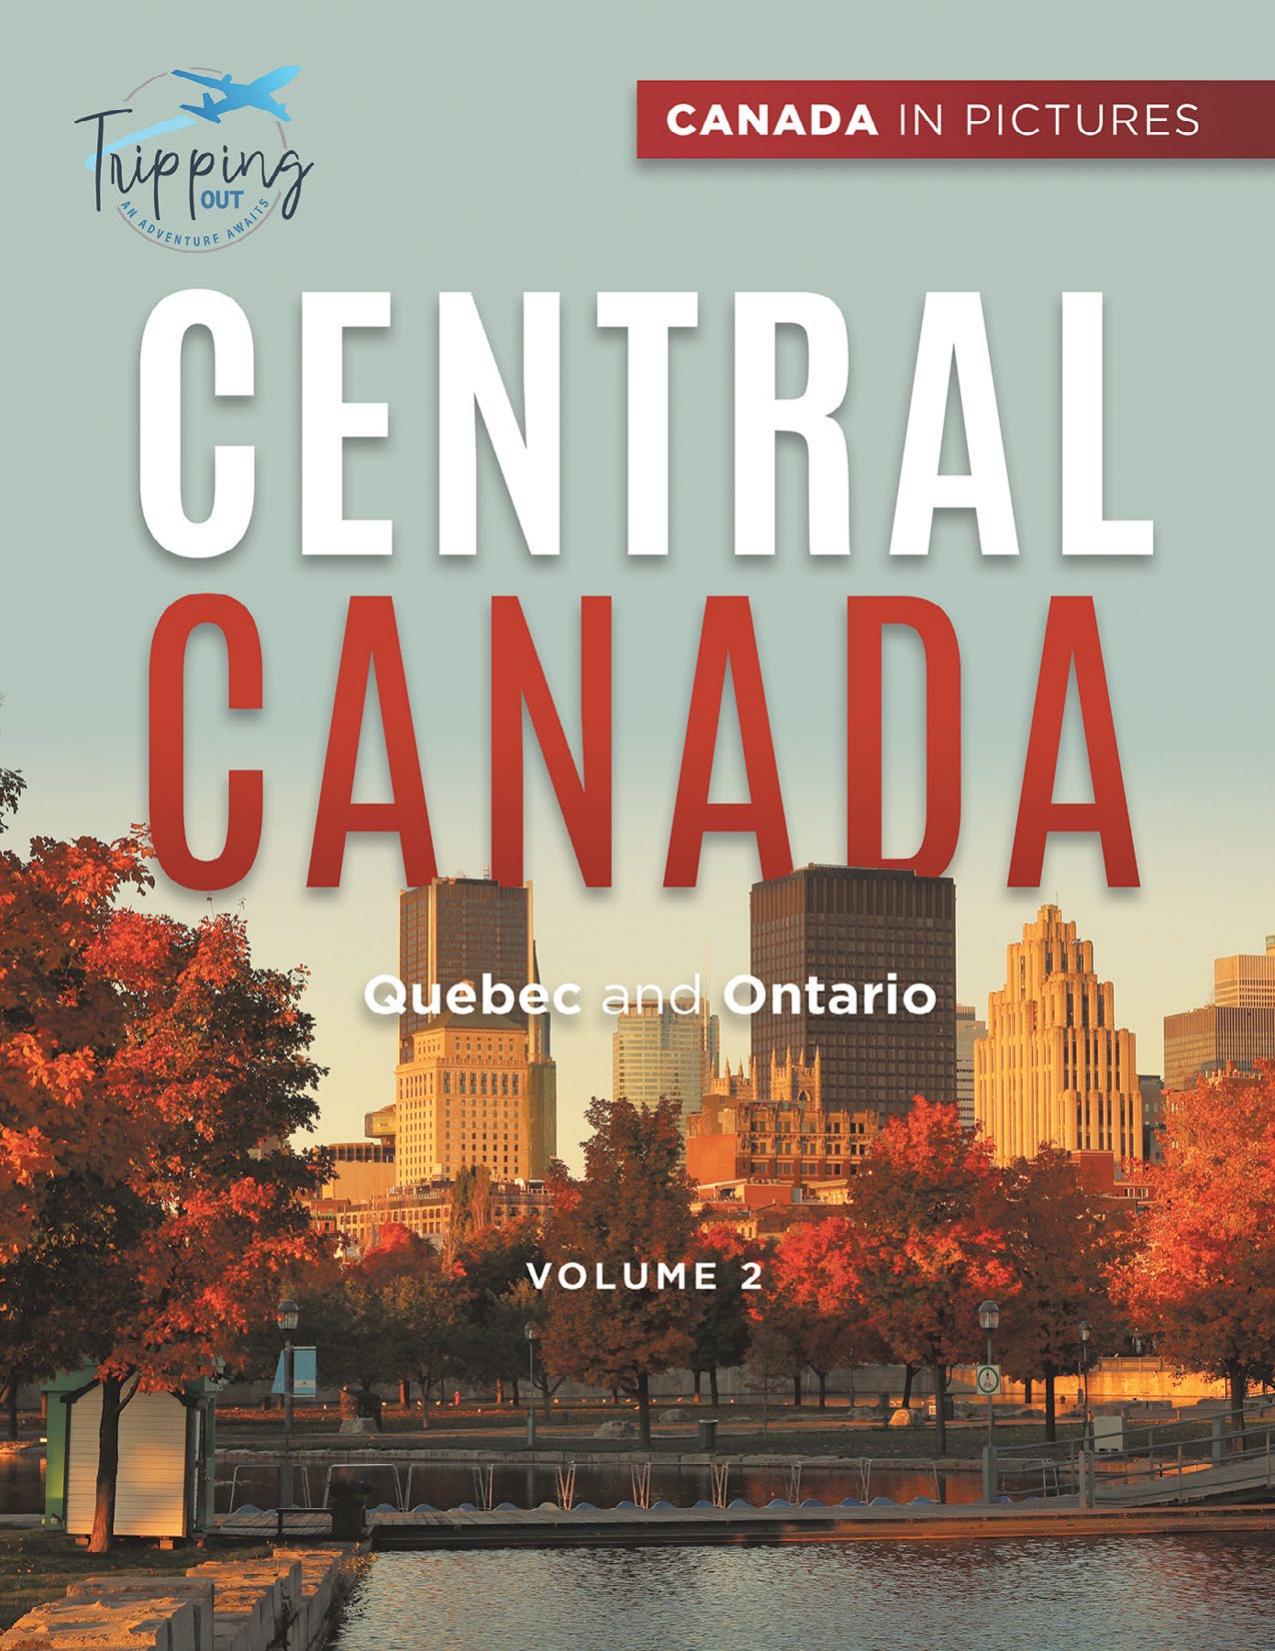 Canada In Pictures--Central Canada--Volume 2--Quebec and Ontario by Tripping Out